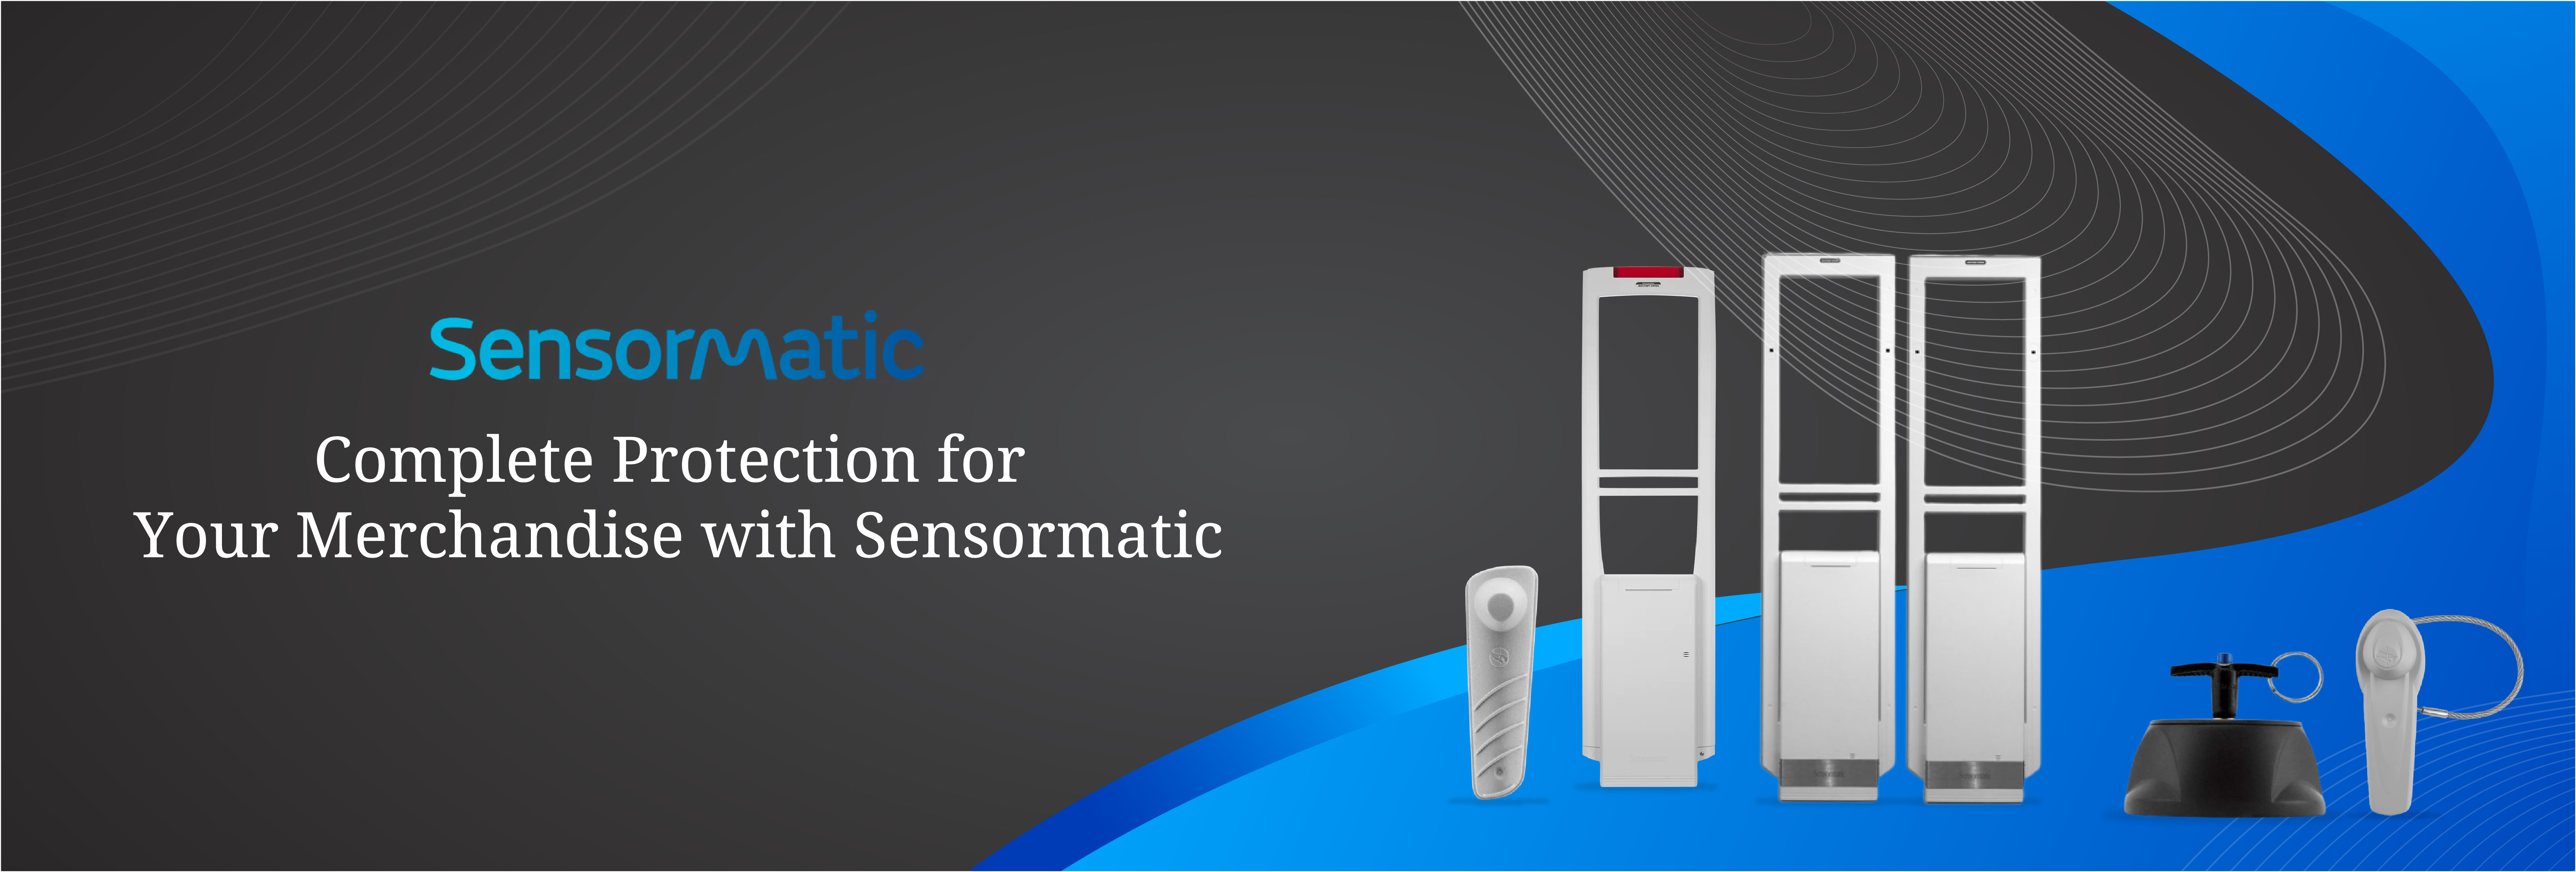 Infome technologies:Complete Protection for Your Merchandise with Sensormatic